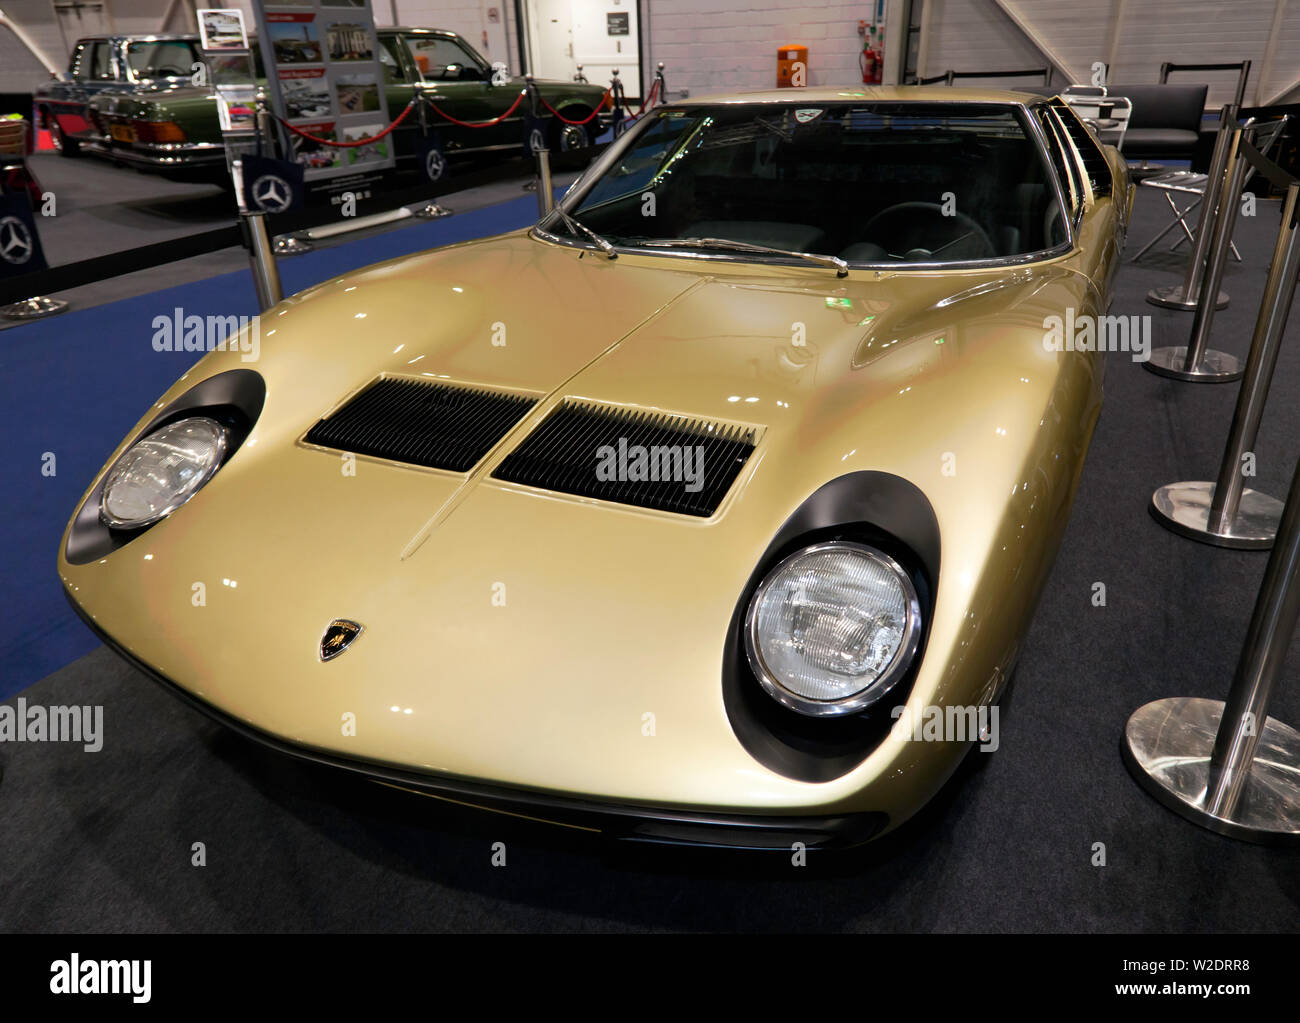 Three-quarters front  view of a 1970 Lamborghini Miura S, on display at the 2019 London Classic Car Show Stock Photo